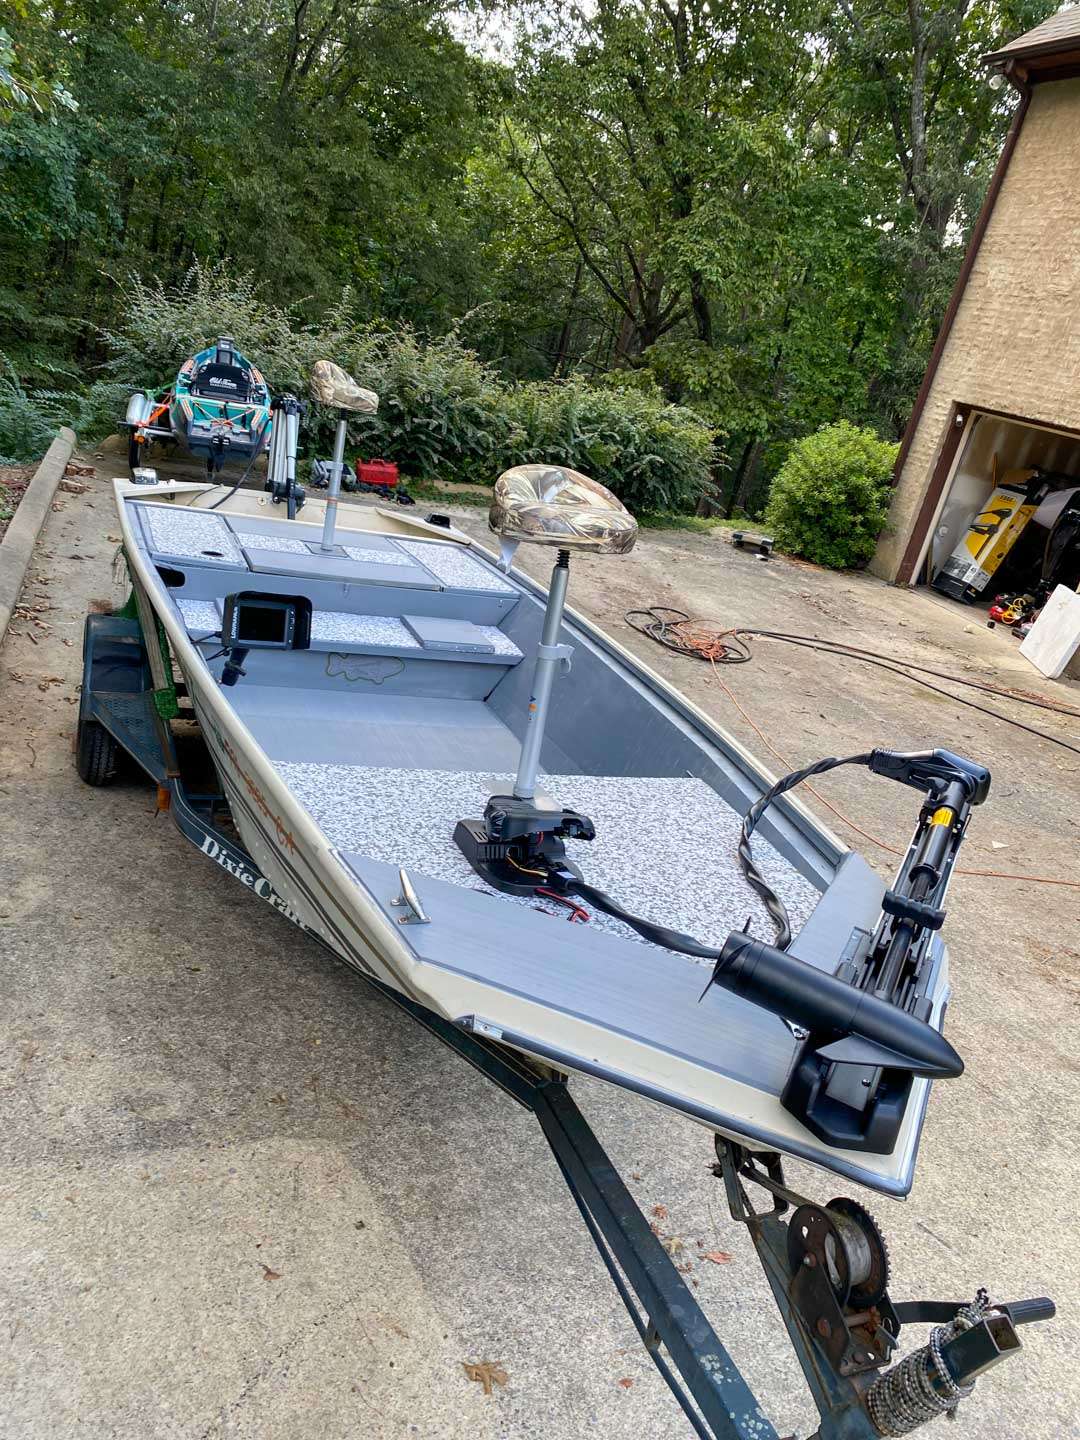 And sheâs done! I added butt seats (that donât exactly match) to make a long day of fishing more comfortable. At BassPro, it cost a total of $200 for the adjustable poles, butt seats and mounting brackets.